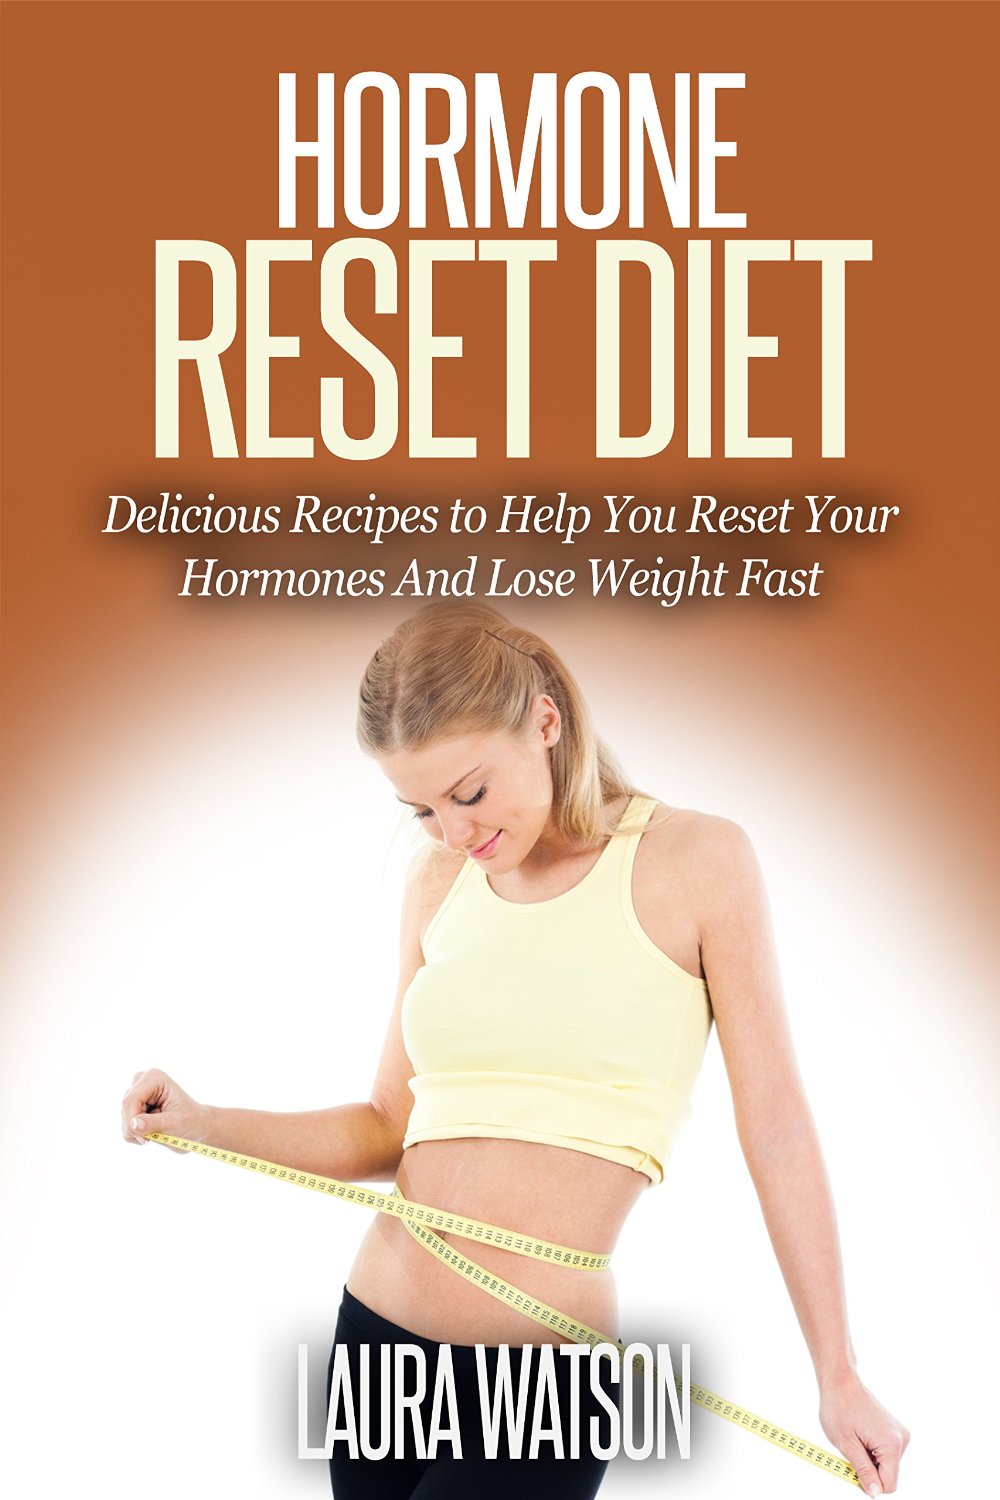 FREE: Hormone Reset Diet: Delicious Recipes to Help You Reset Your Hormones And Lose Weight Fast by Laura Watson